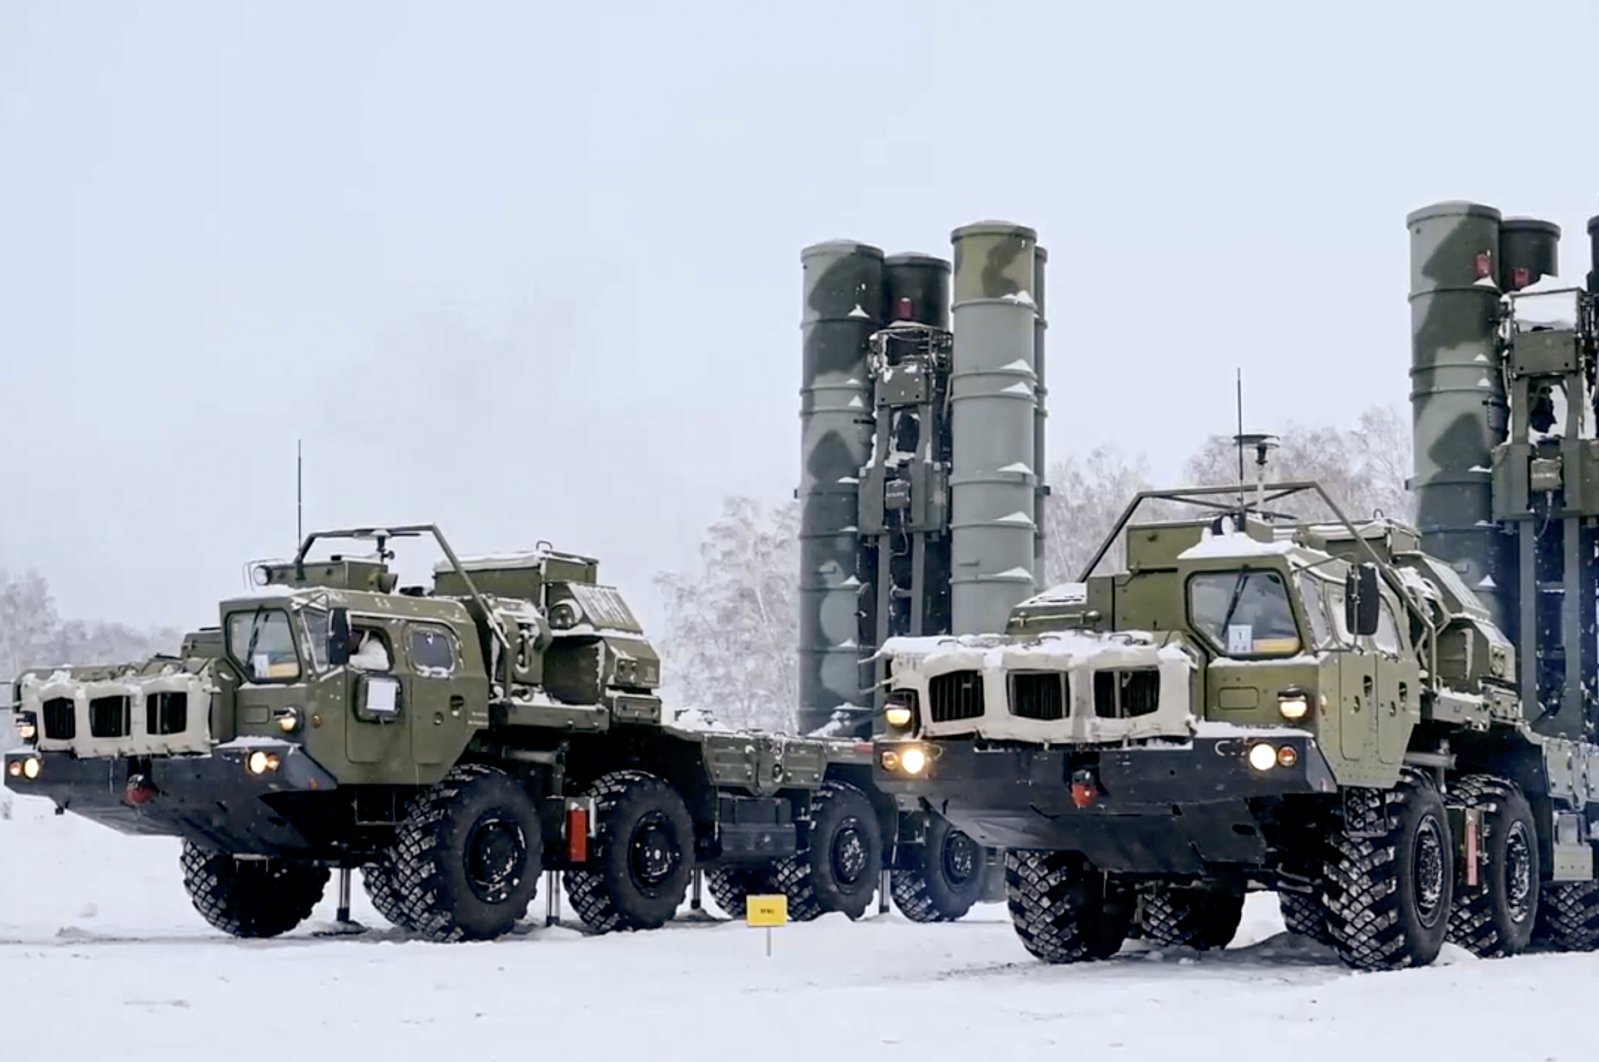 A view of Russian S-400 air defense missile systems in position during a military exercise, in Siberia, Russia, Feb. 3, 2022. (Russian Defense Ministry Press Service via AP)